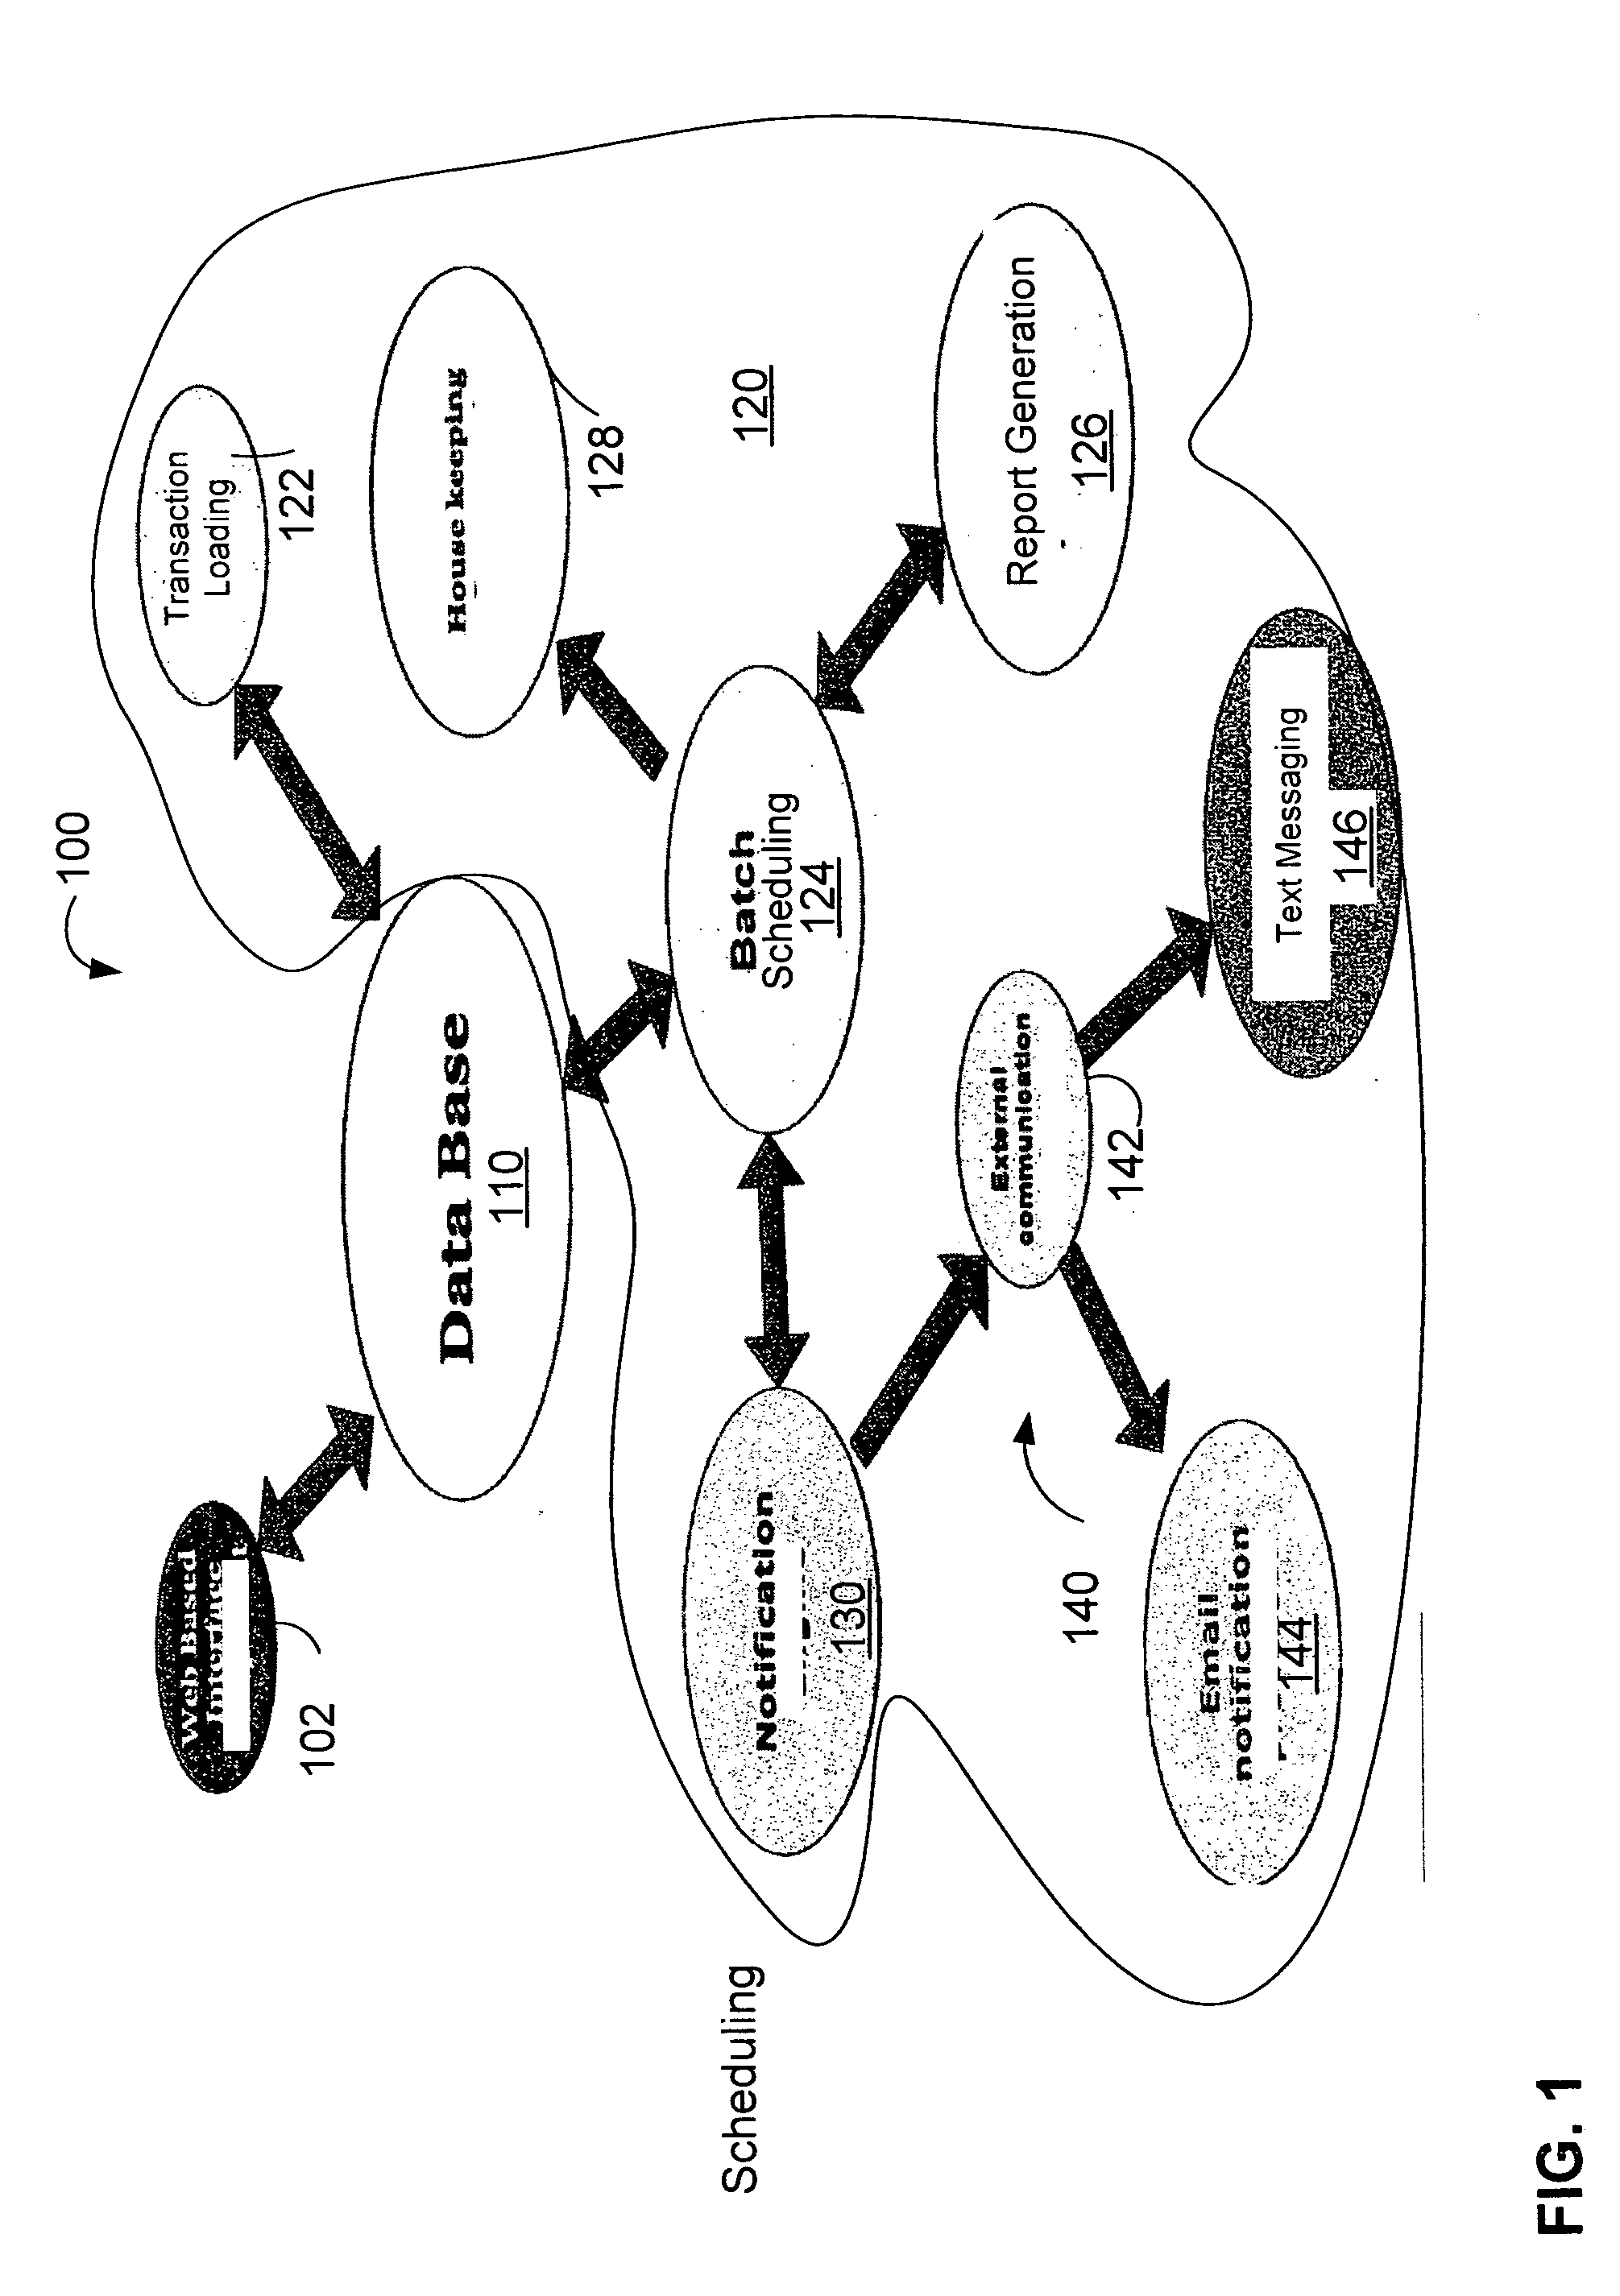 Method and system for manipulating purchase information